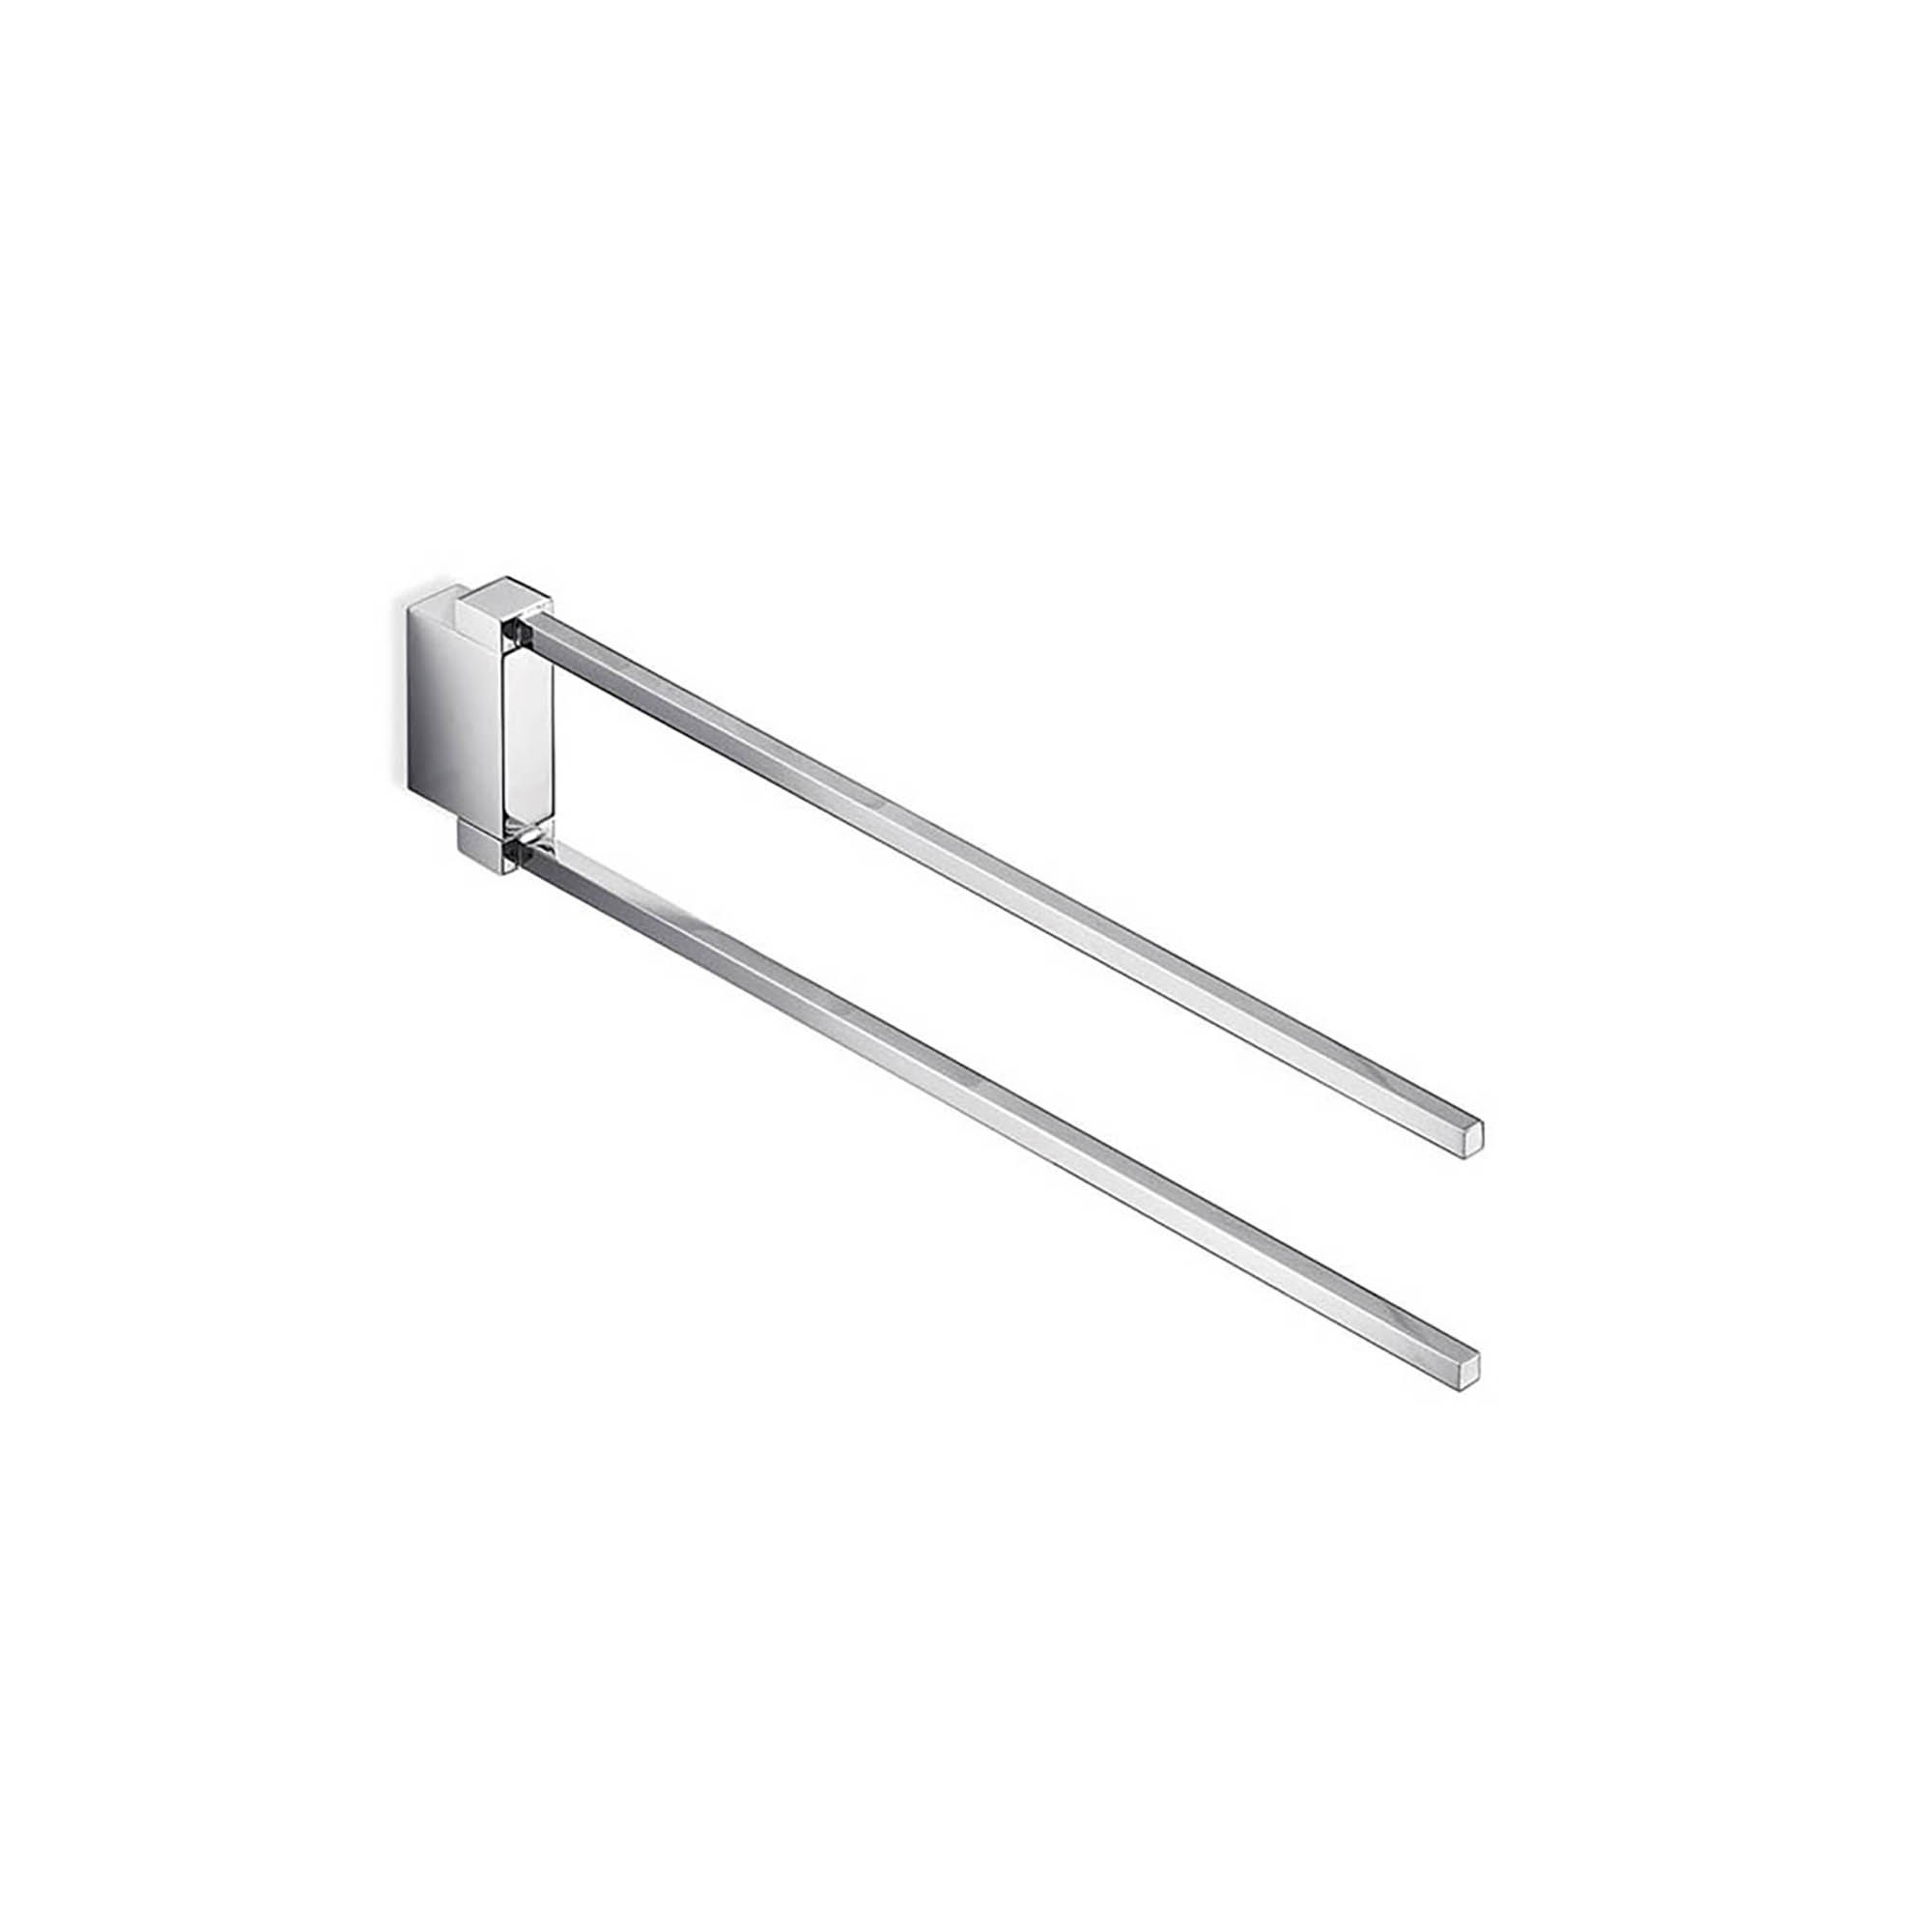 Divo A15150 Double Swing Towel Bar in Polished Chrome